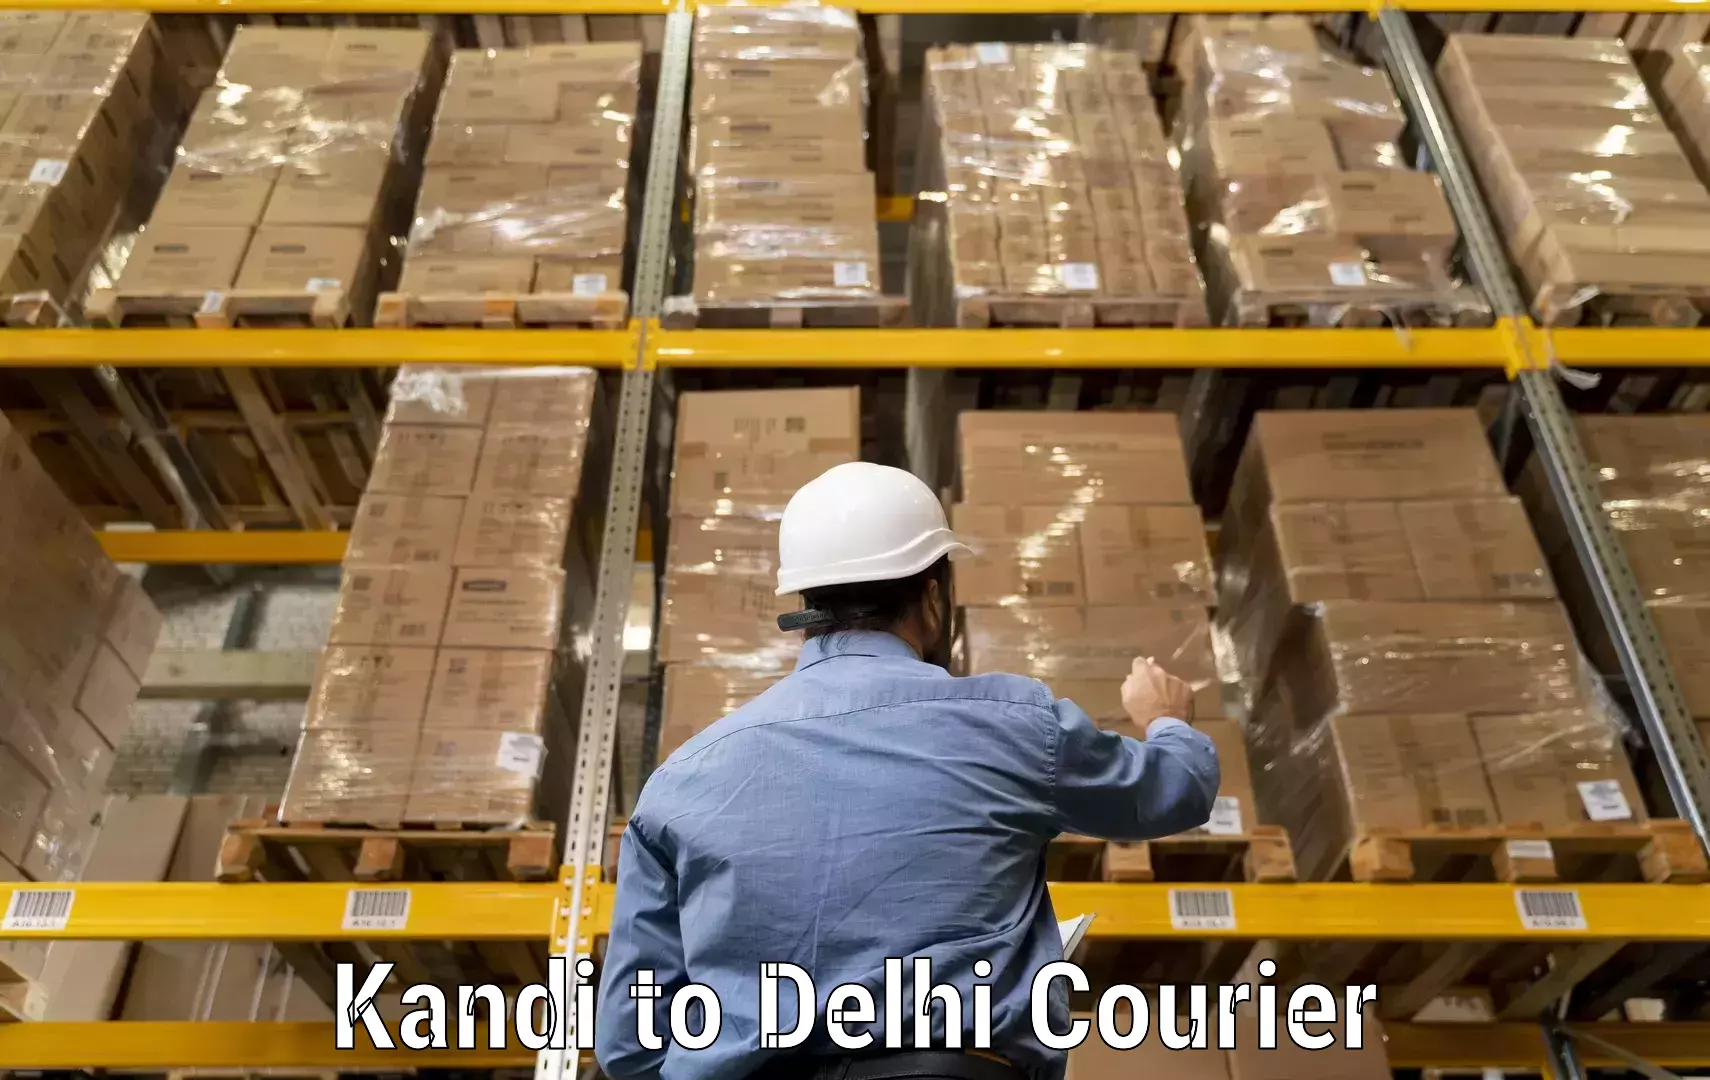 Courier app Kandi to Lodhi Road